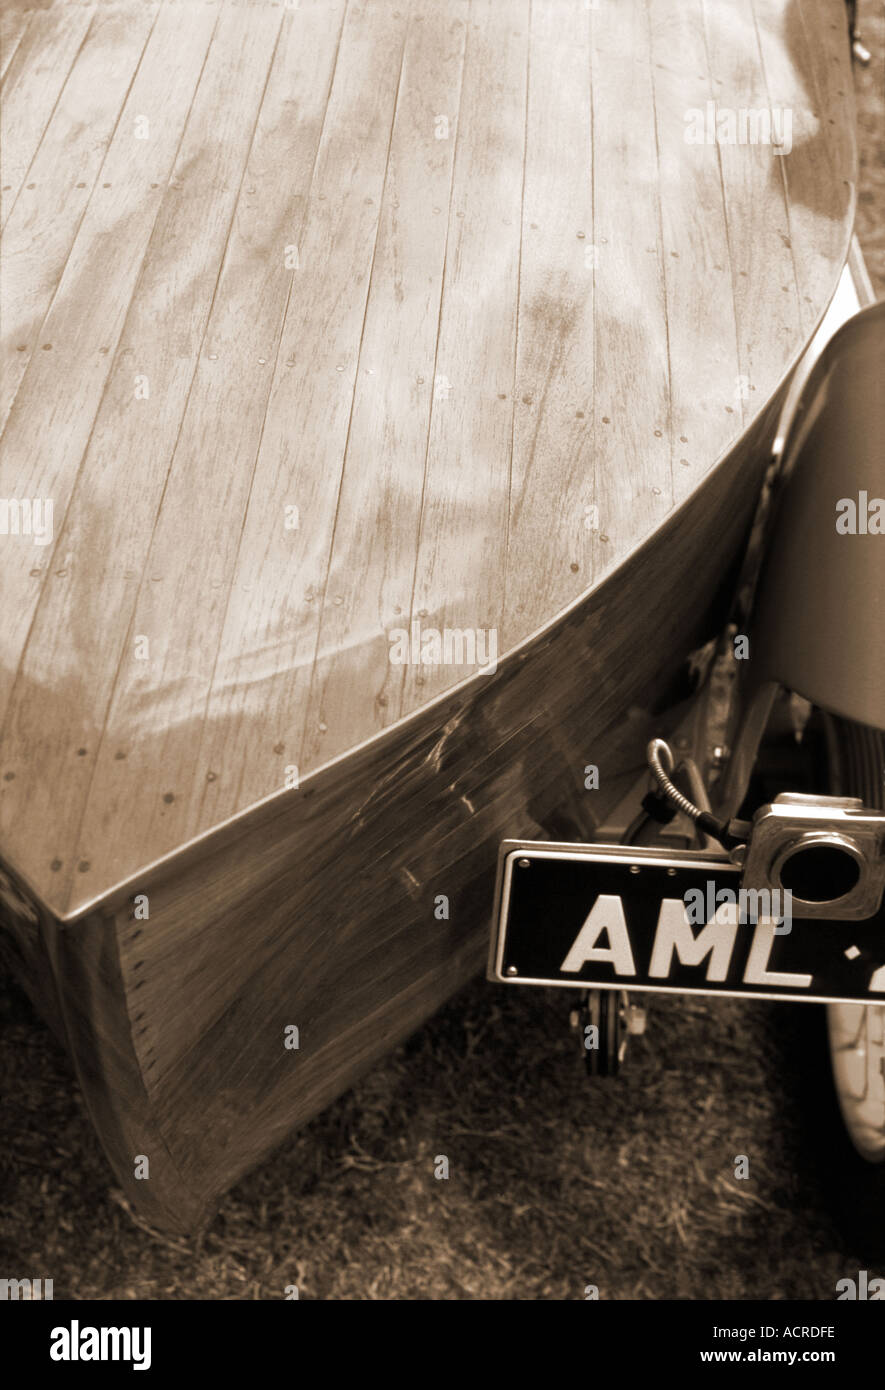 tail of an amilcar made of wood in style of a boat Stock Photo